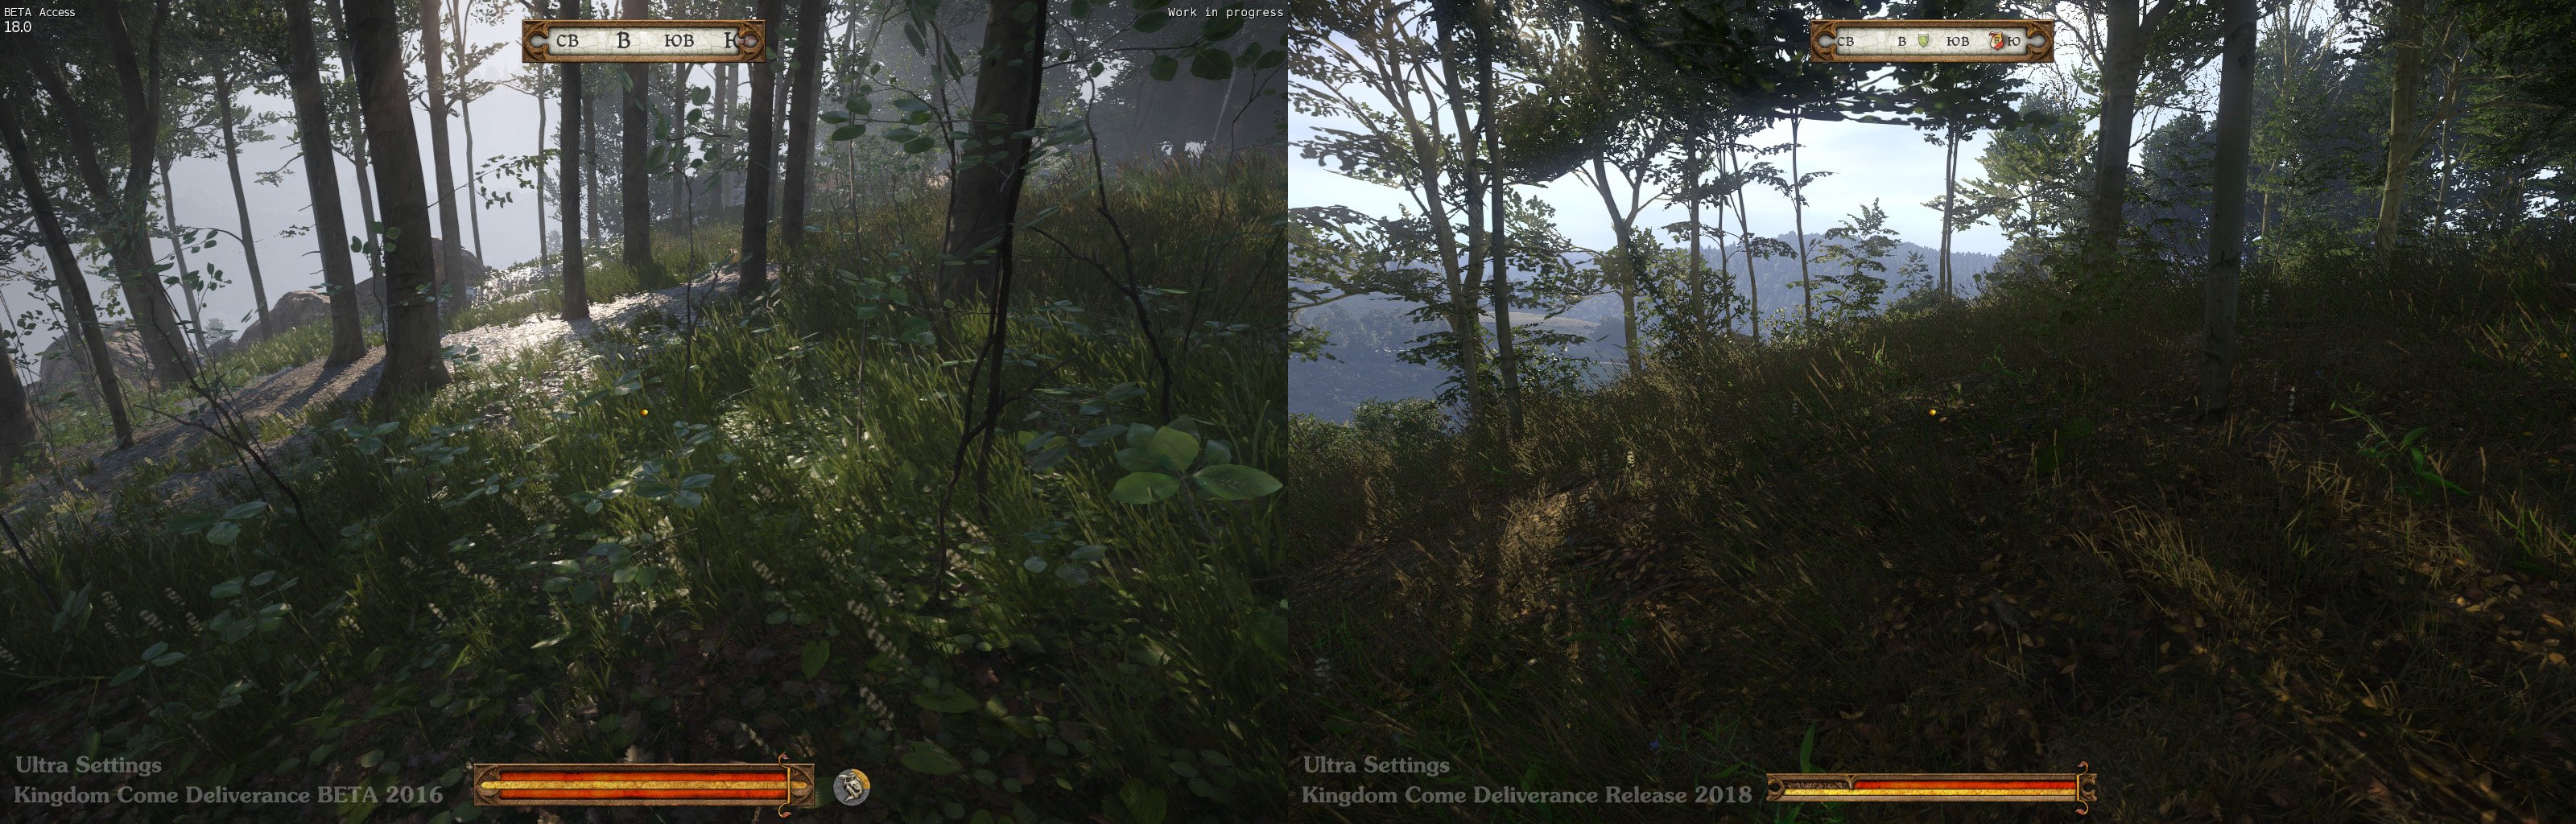 Enkelhed lettelse Berigelse Deep Silver on Twitter: "How realistic is Kingdom Come: Deliverance? This  post on the KCD Reddit is comparing the game to real life!  https://t.co/C00bXgOudY https://t.co/giHJDuSDiG" / Twitter